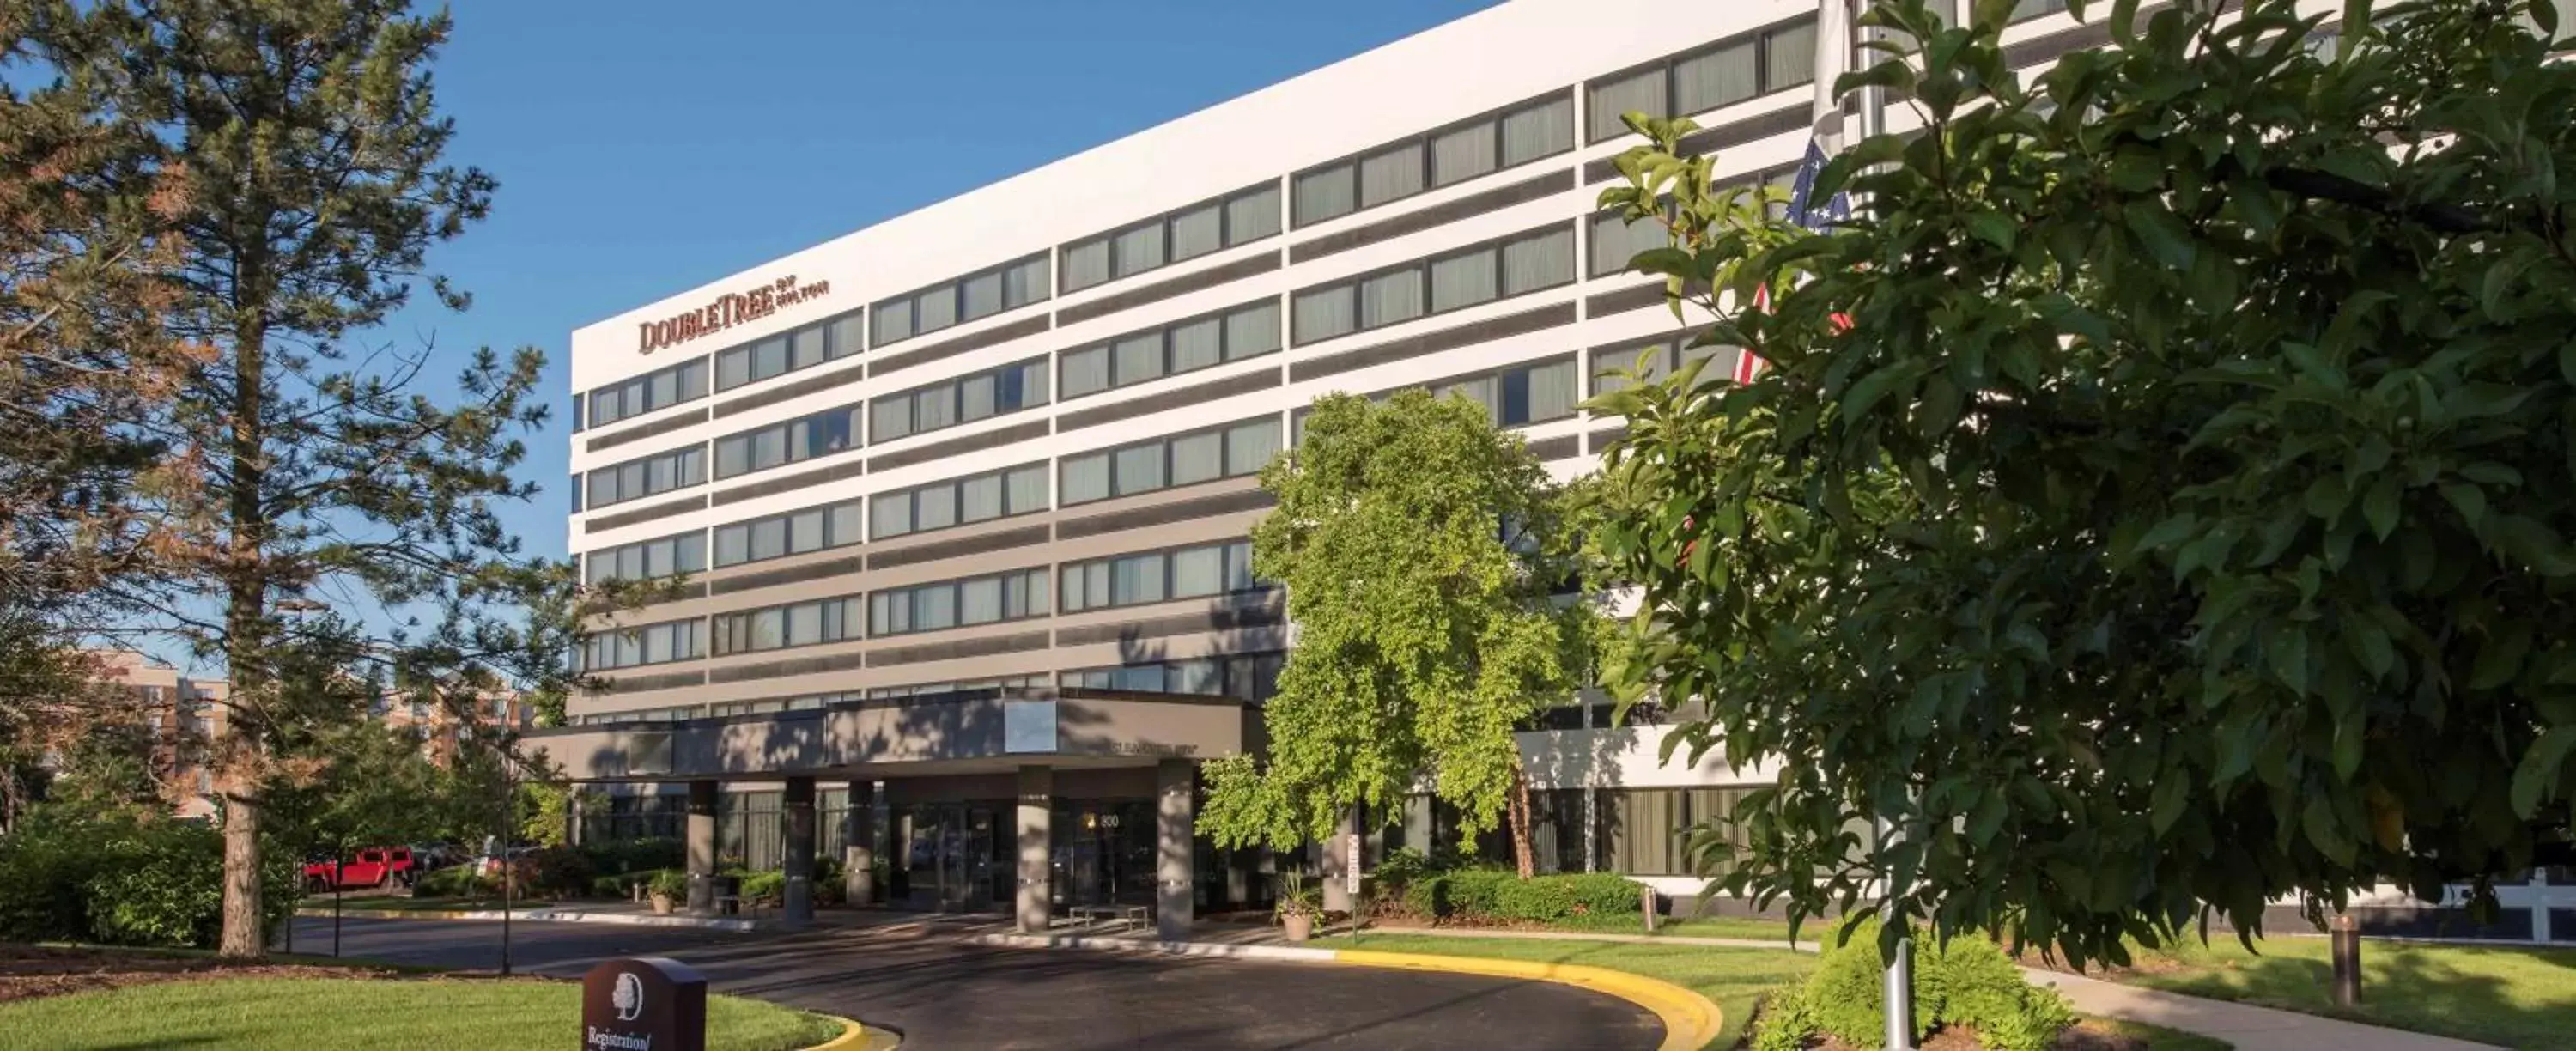 Property Building in DoubleTree by Hilton Hotel Chicago - Schaumburg